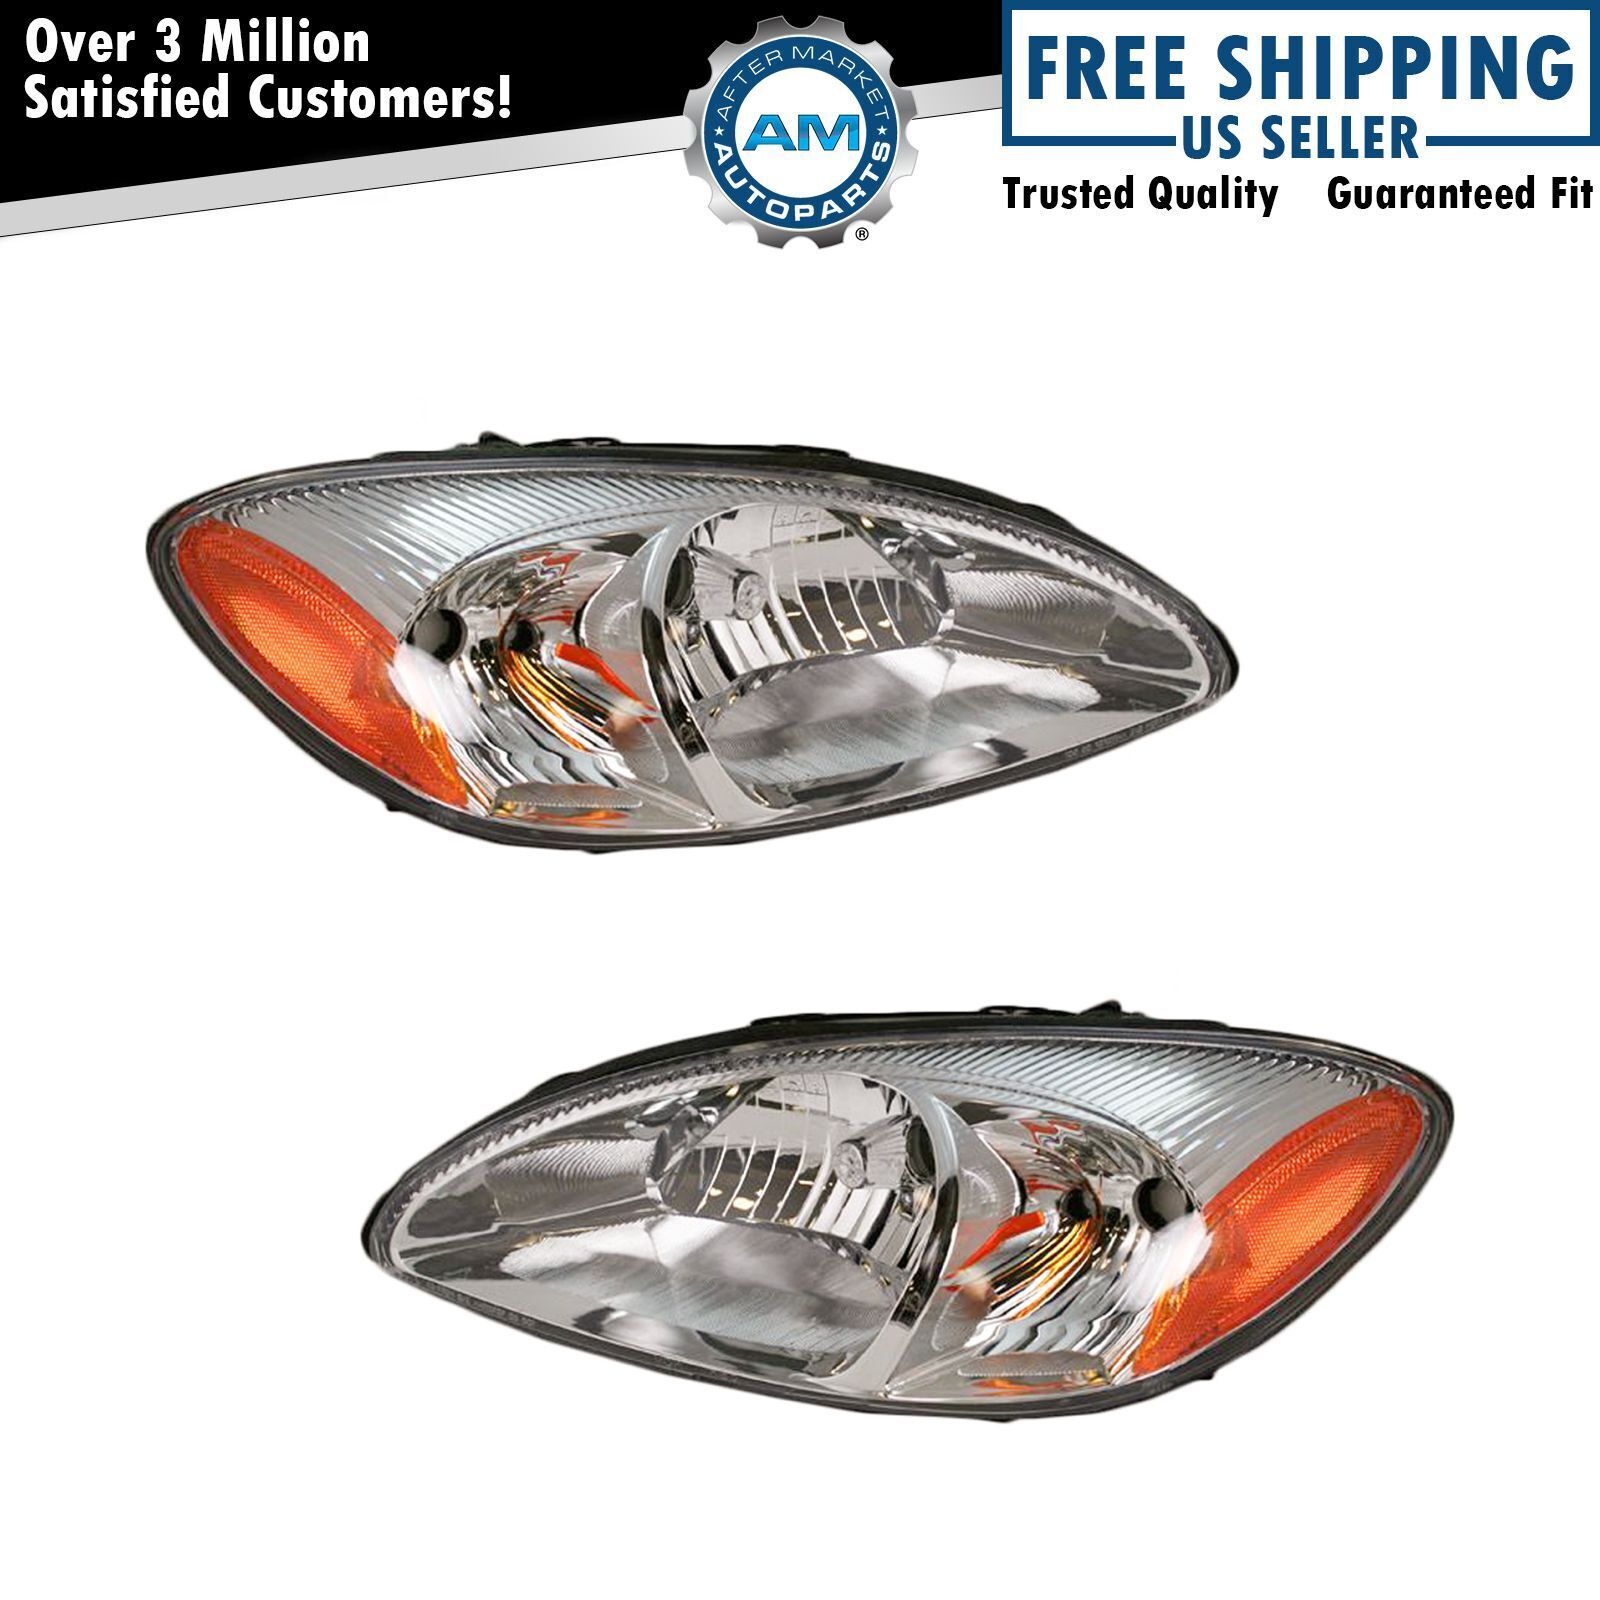 Headlights Headlamps Left & Right Pair Set NEW for 00-07 Ford Taurus